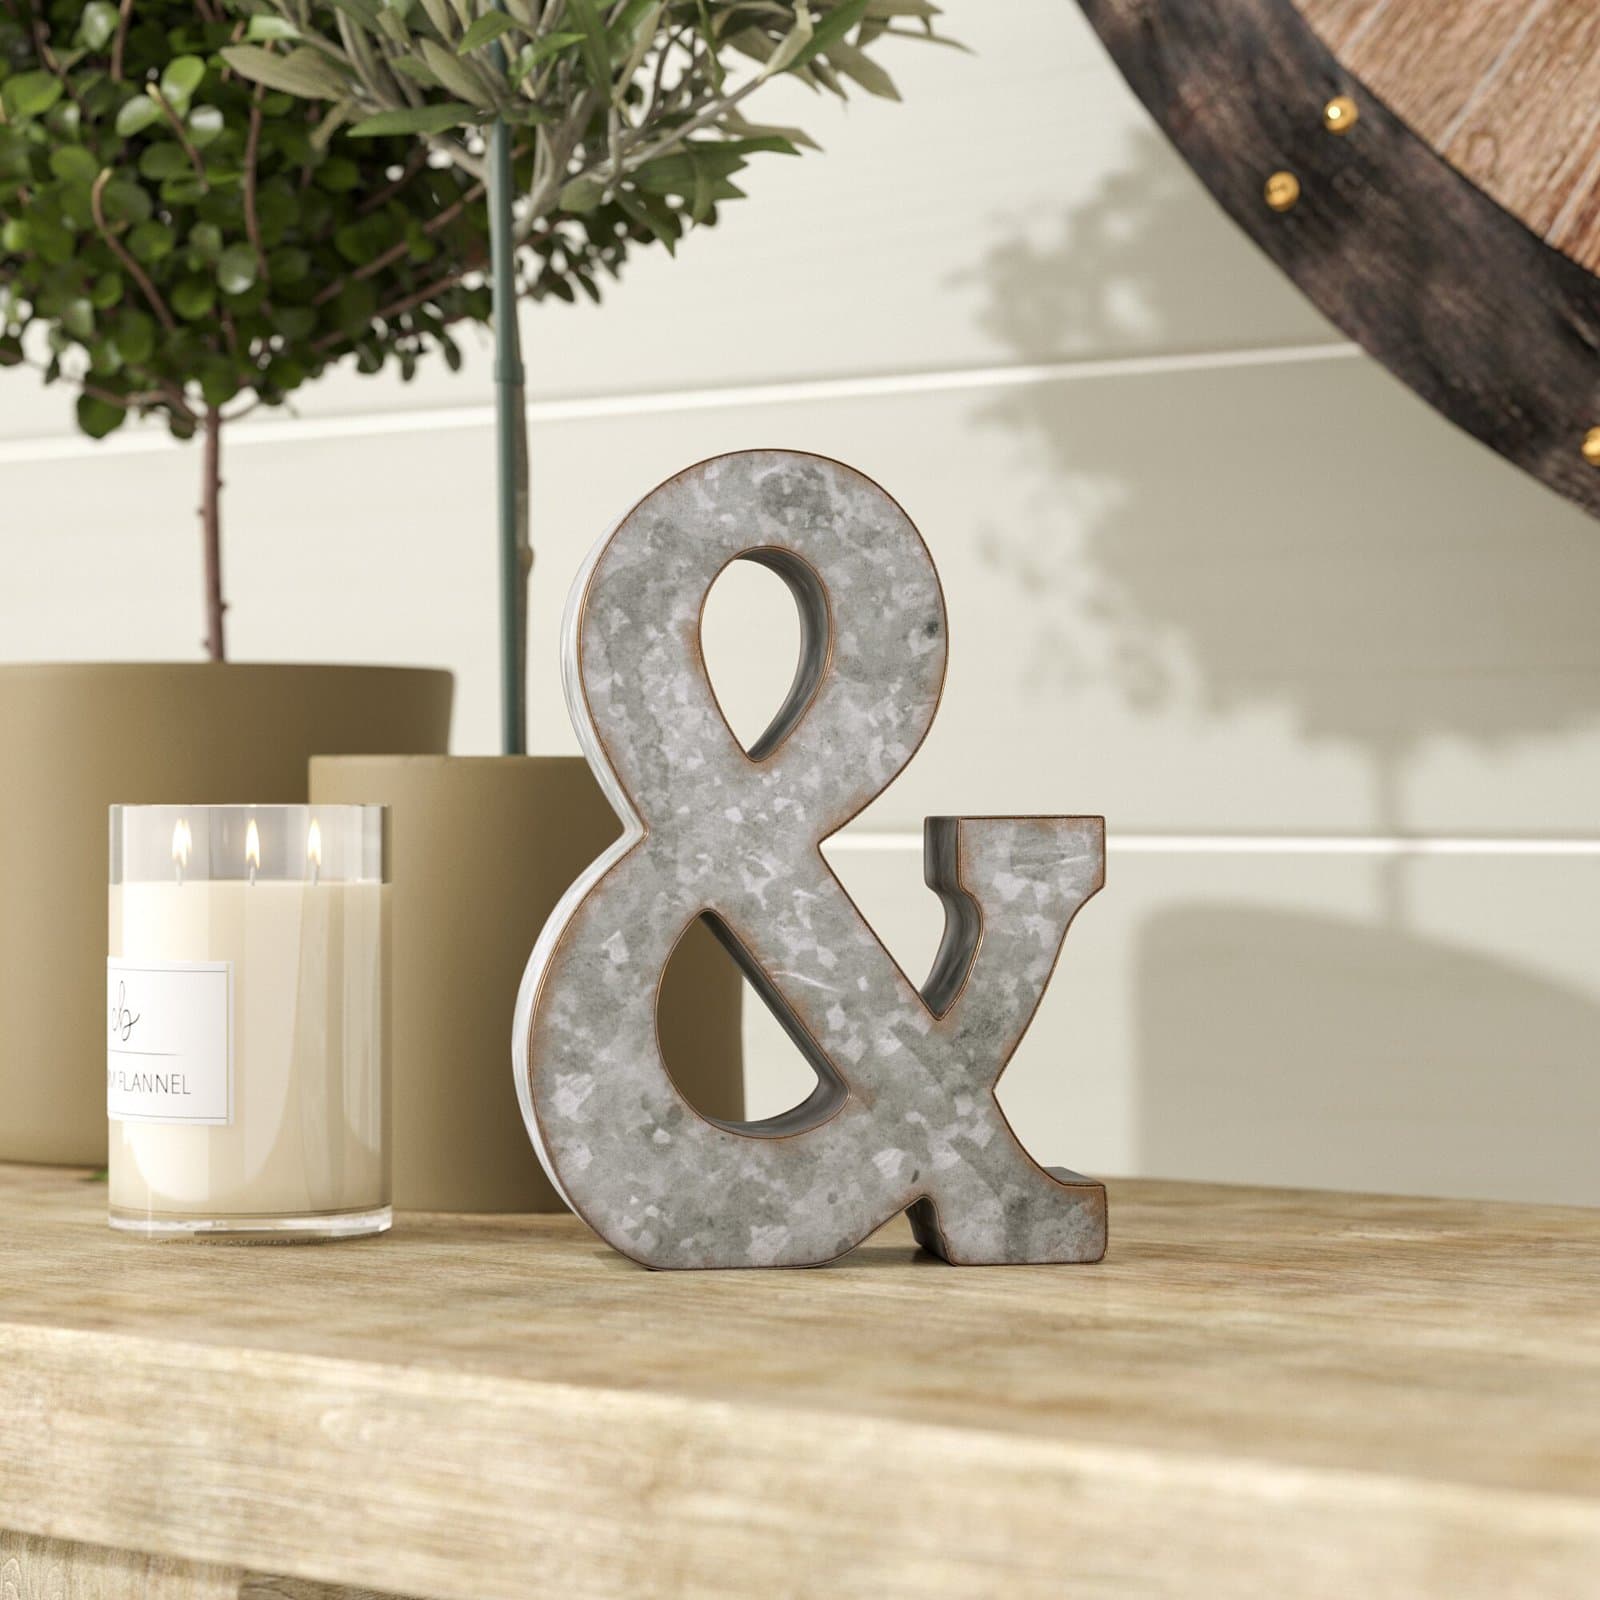 Decorate with Galvanized Letter Blocks